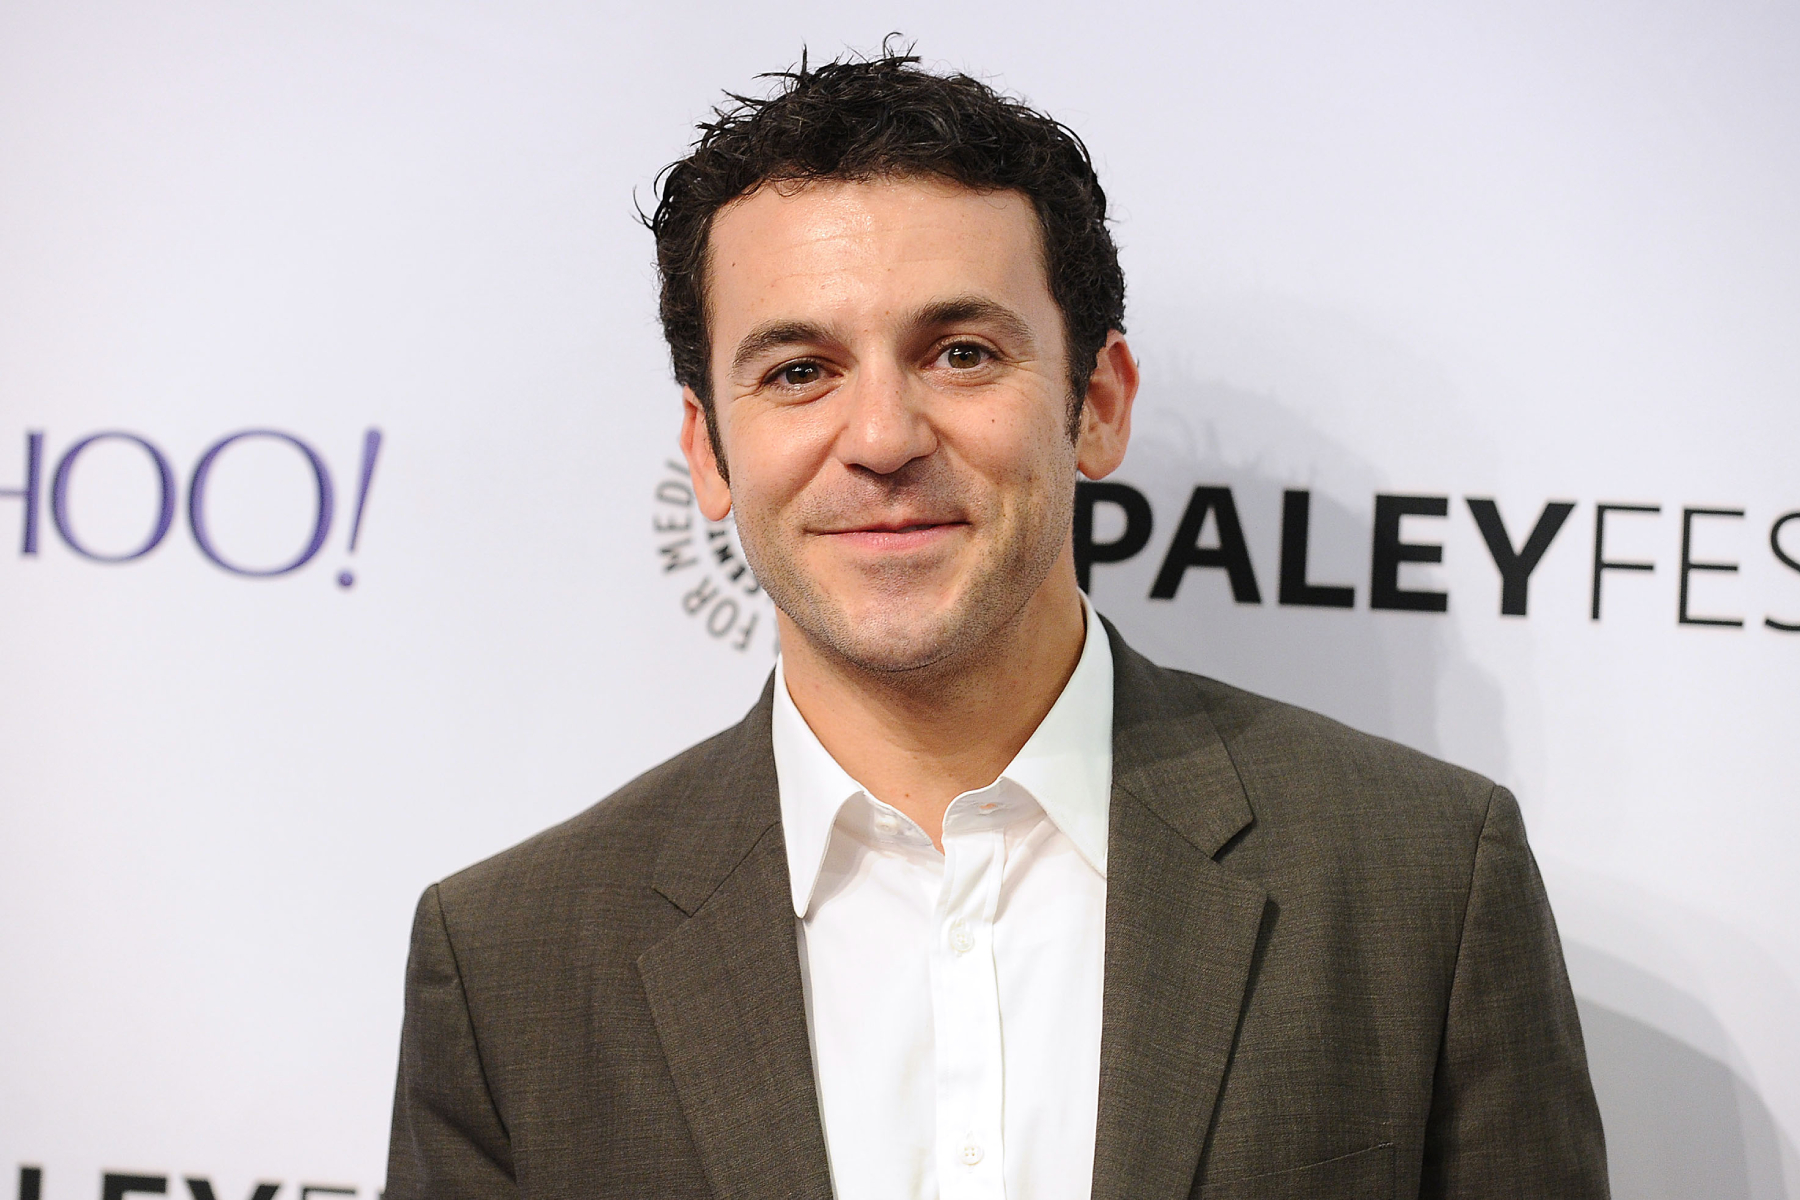 Fred Savage accused of sexual misconduct by a former employee